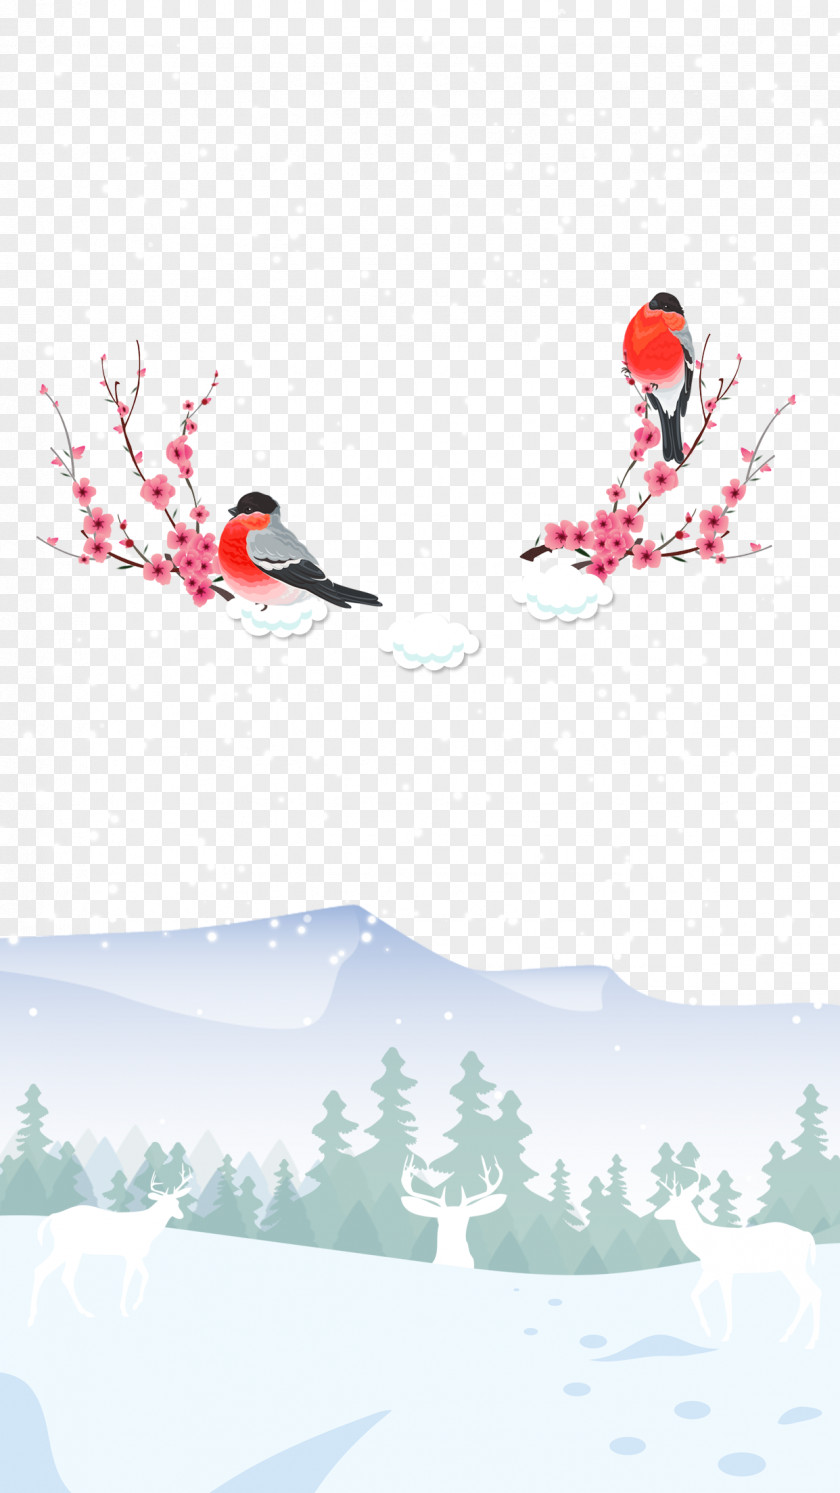 Winter Scenery Dongzhi Poster Illustration PNG